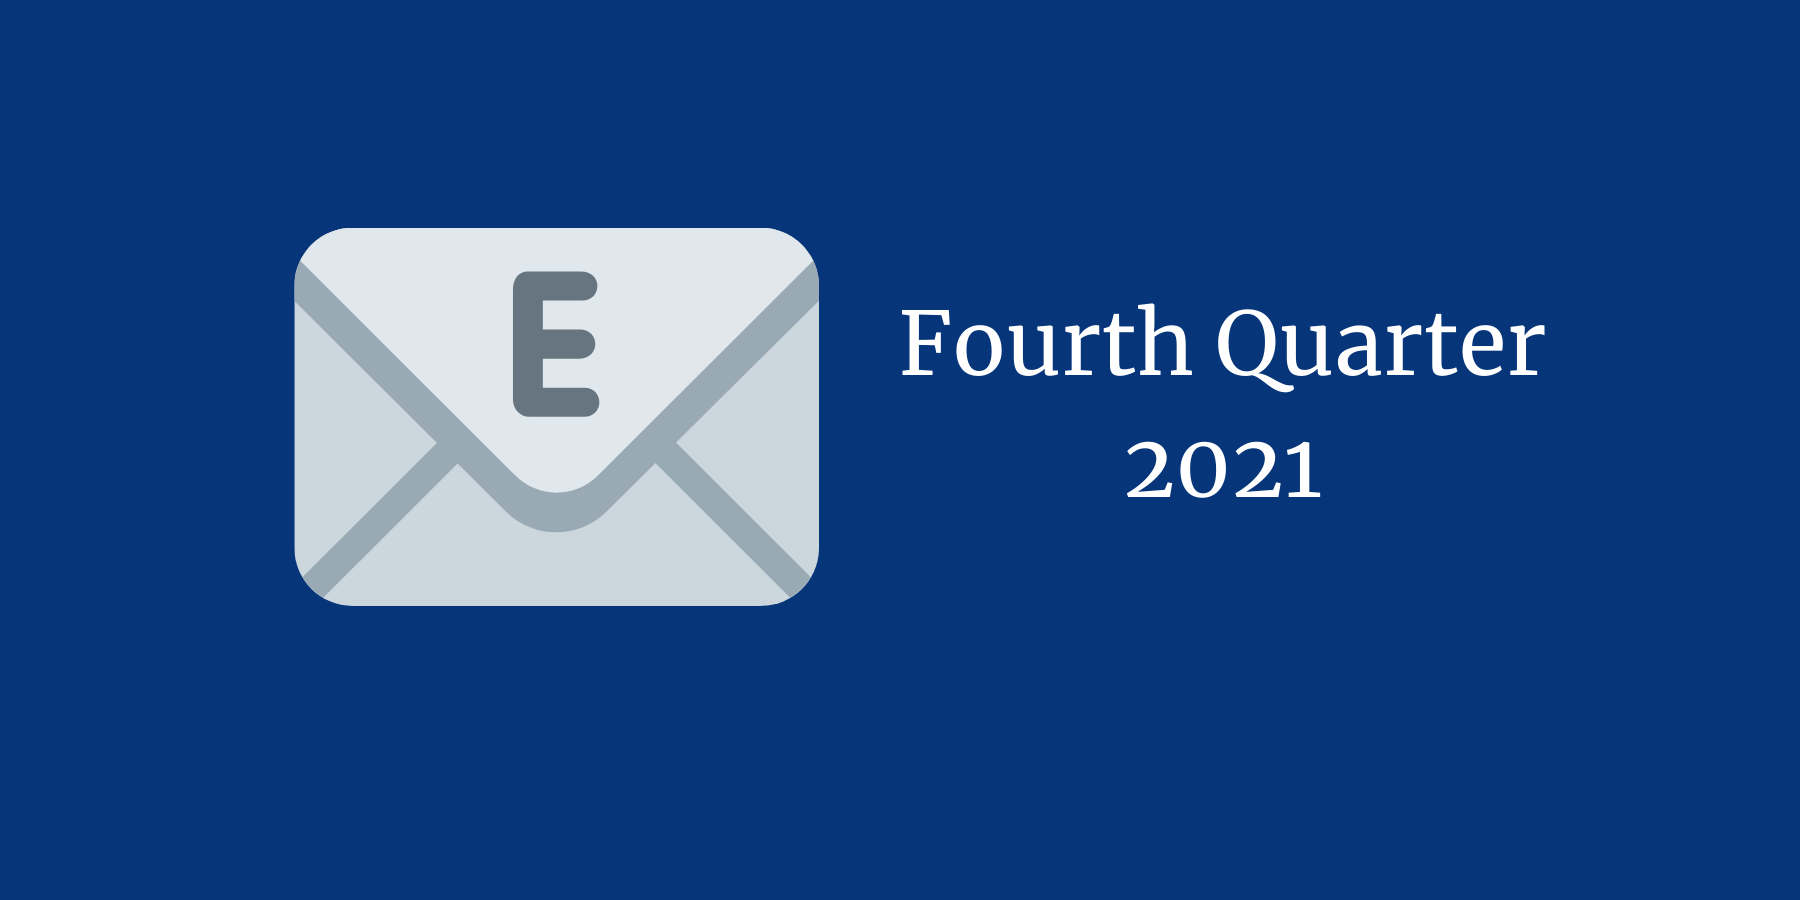 Email icon with text on the right that reads "Fourth Quarter 2021"